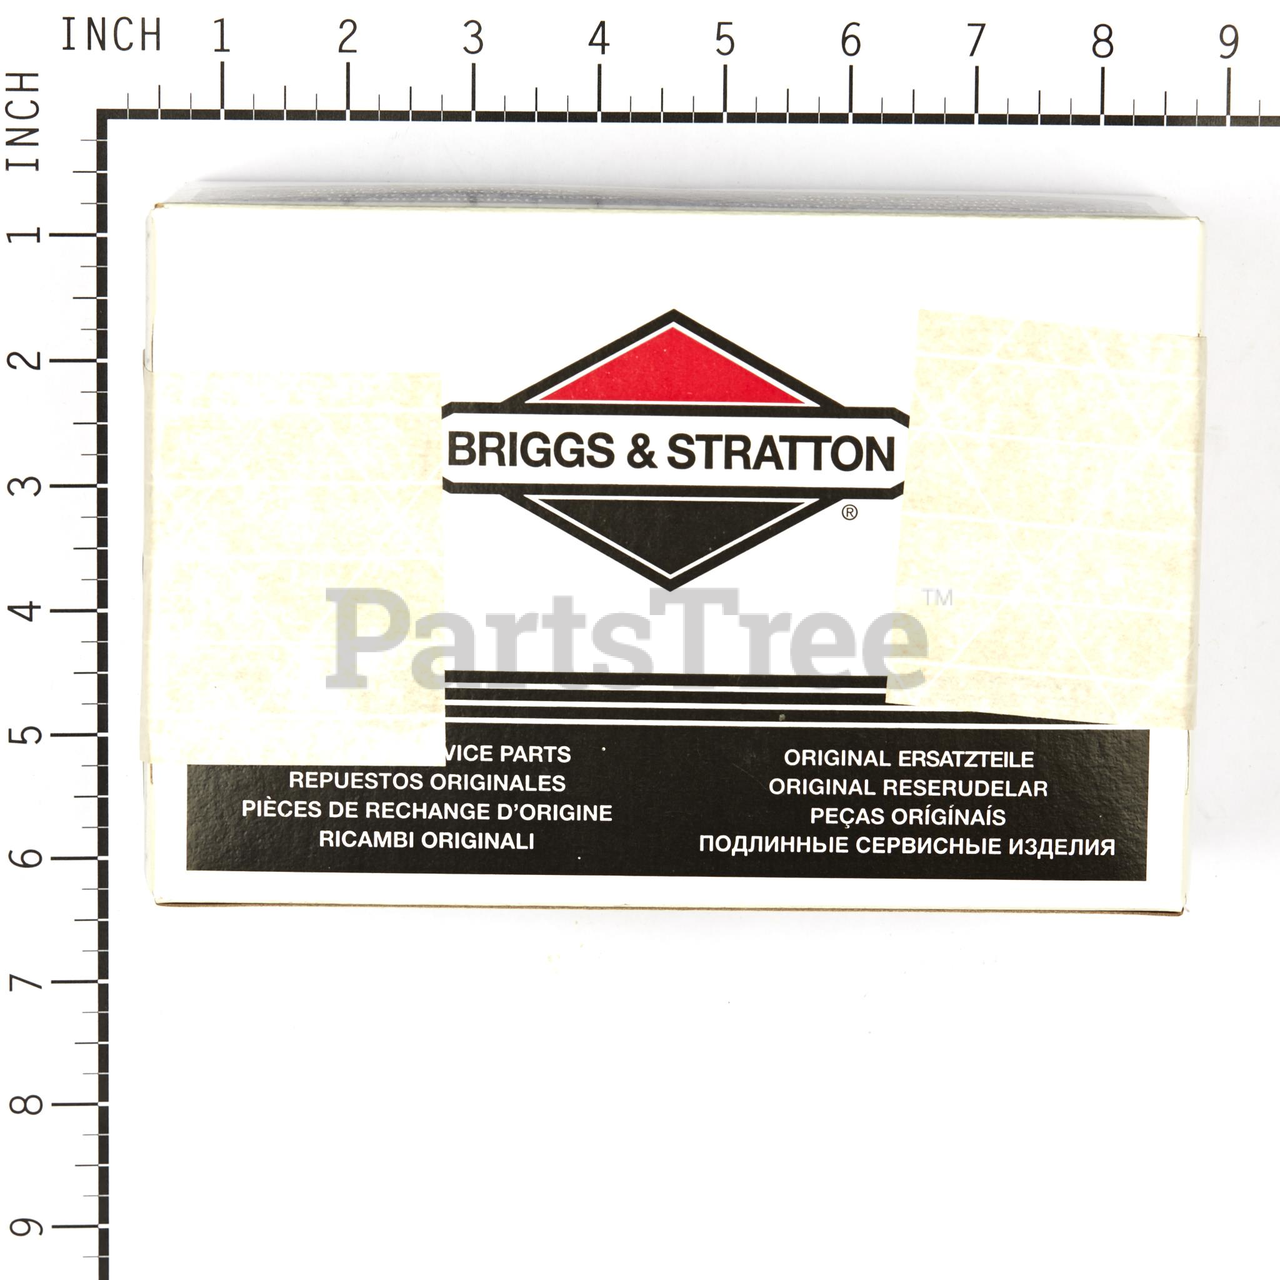 BRP 590400 - Product Images (Slide 9 of 10)